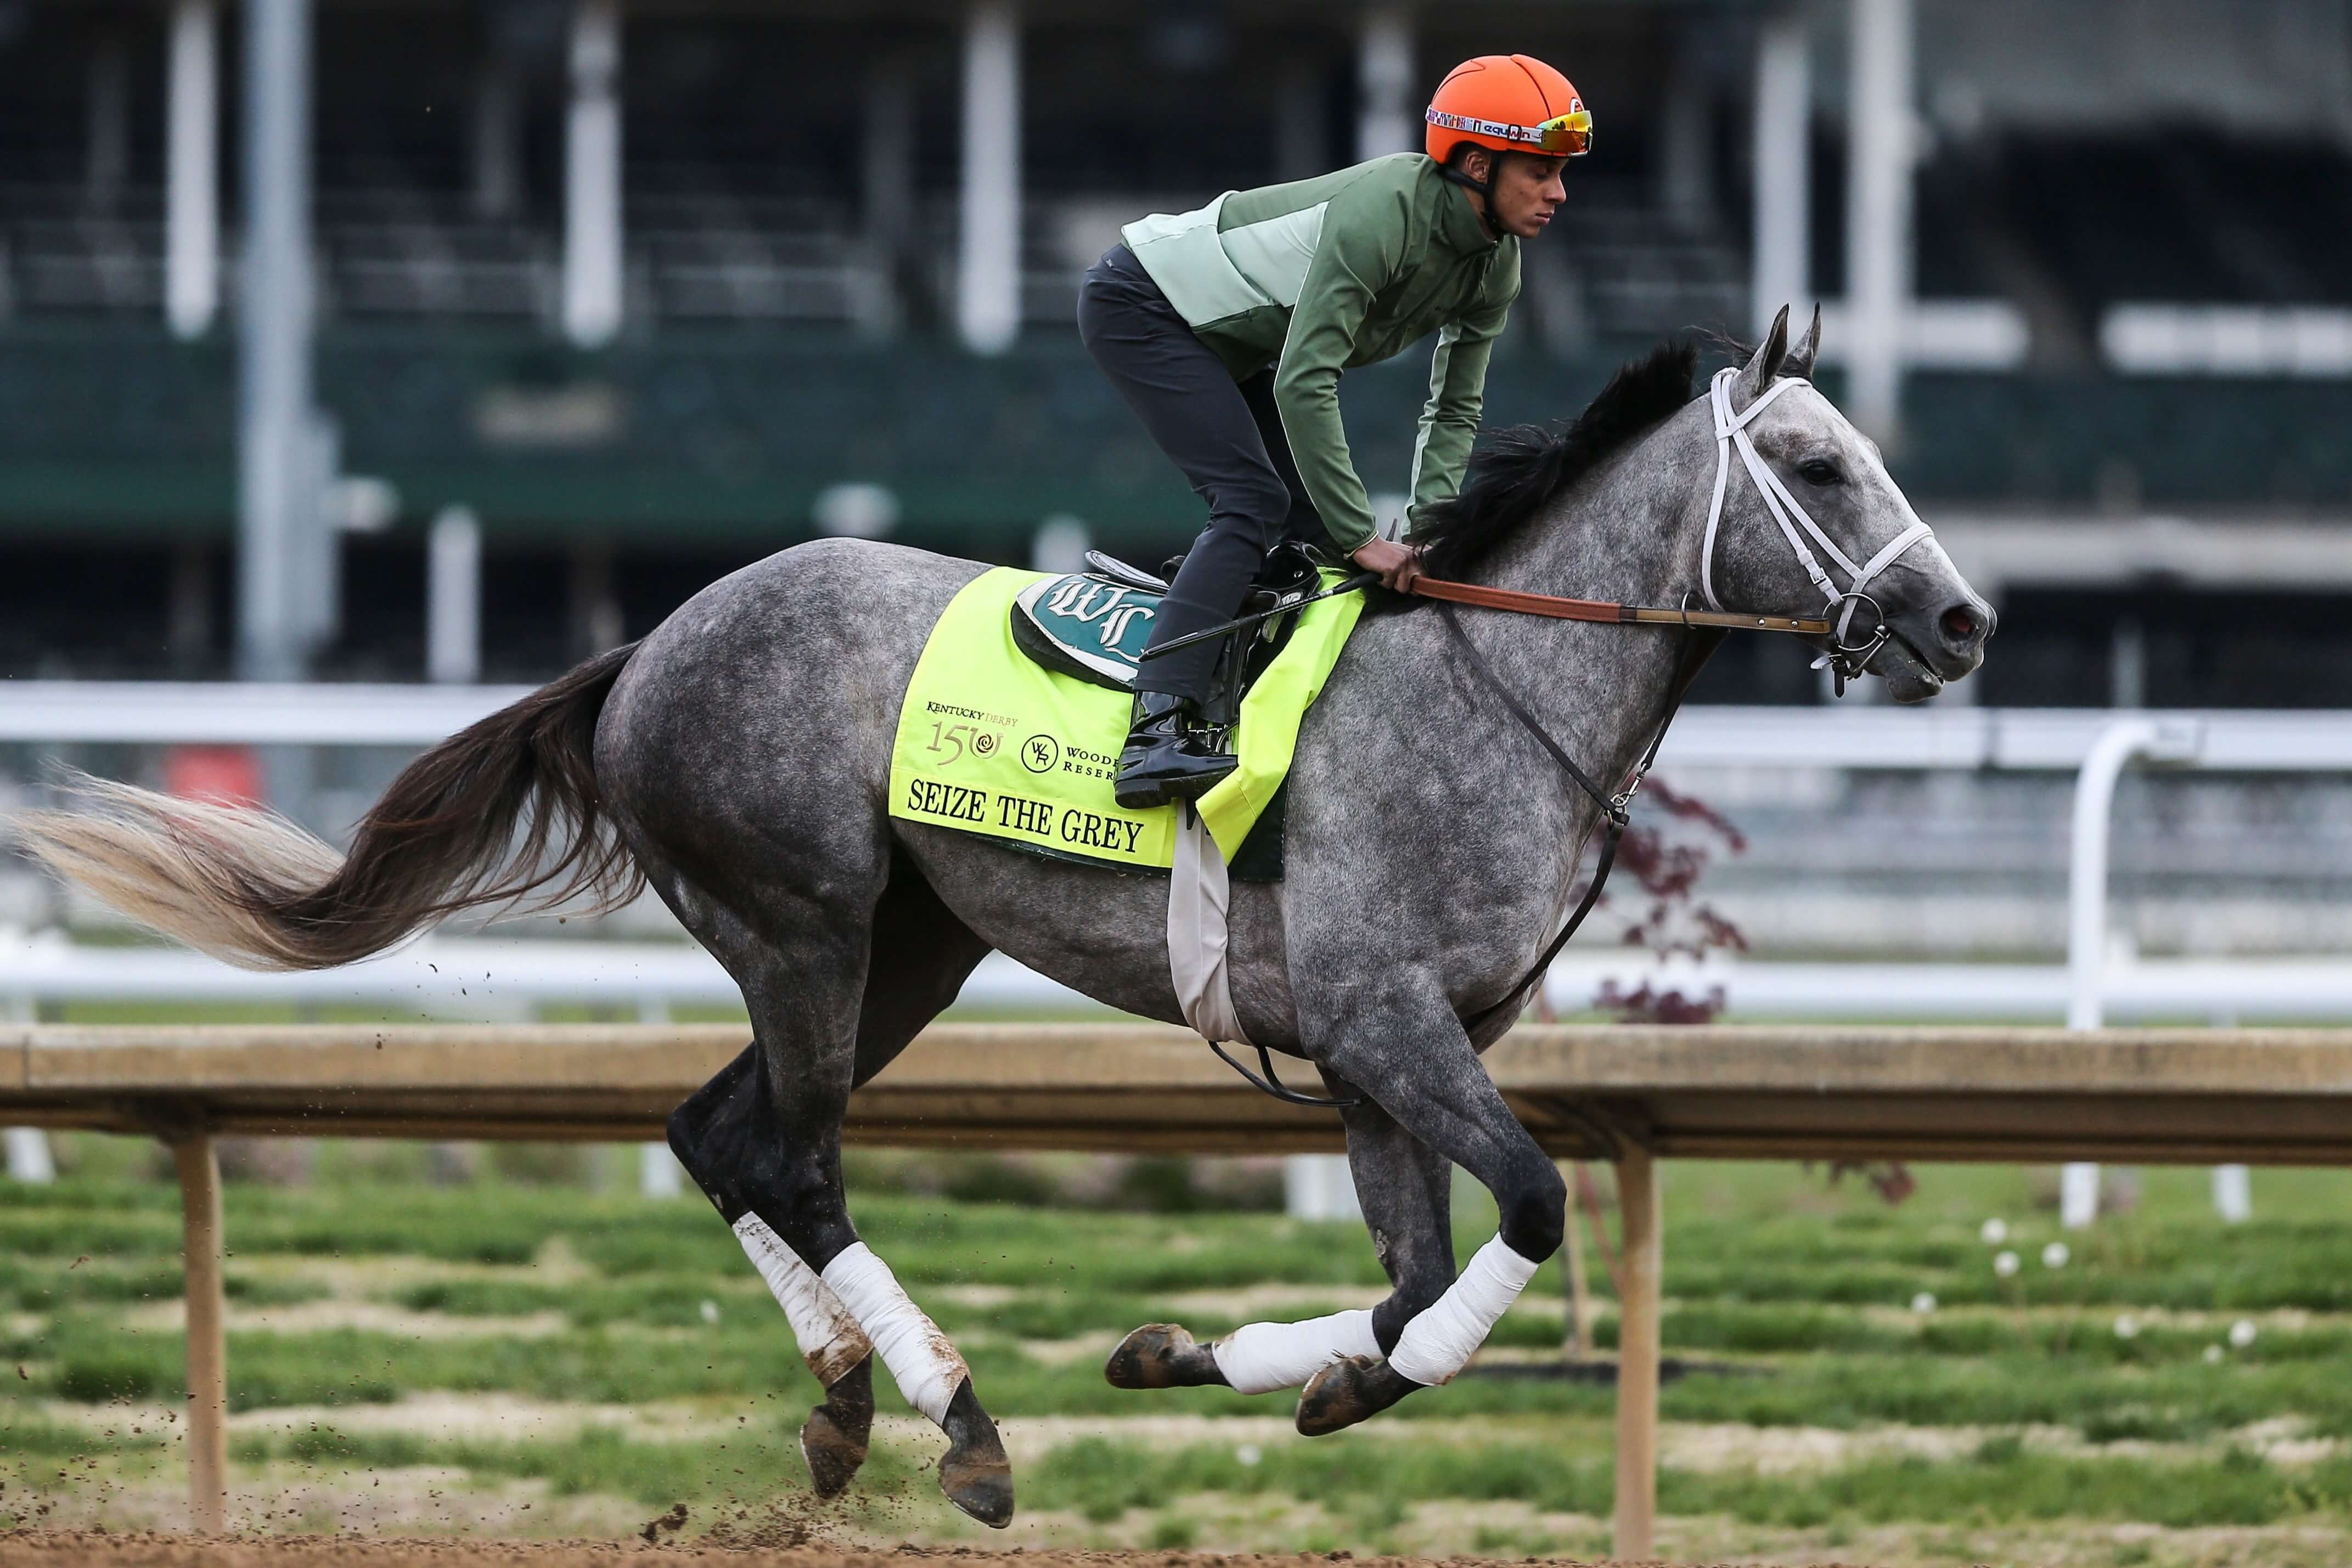 Seize the Grey Belmont Stakes horse racing